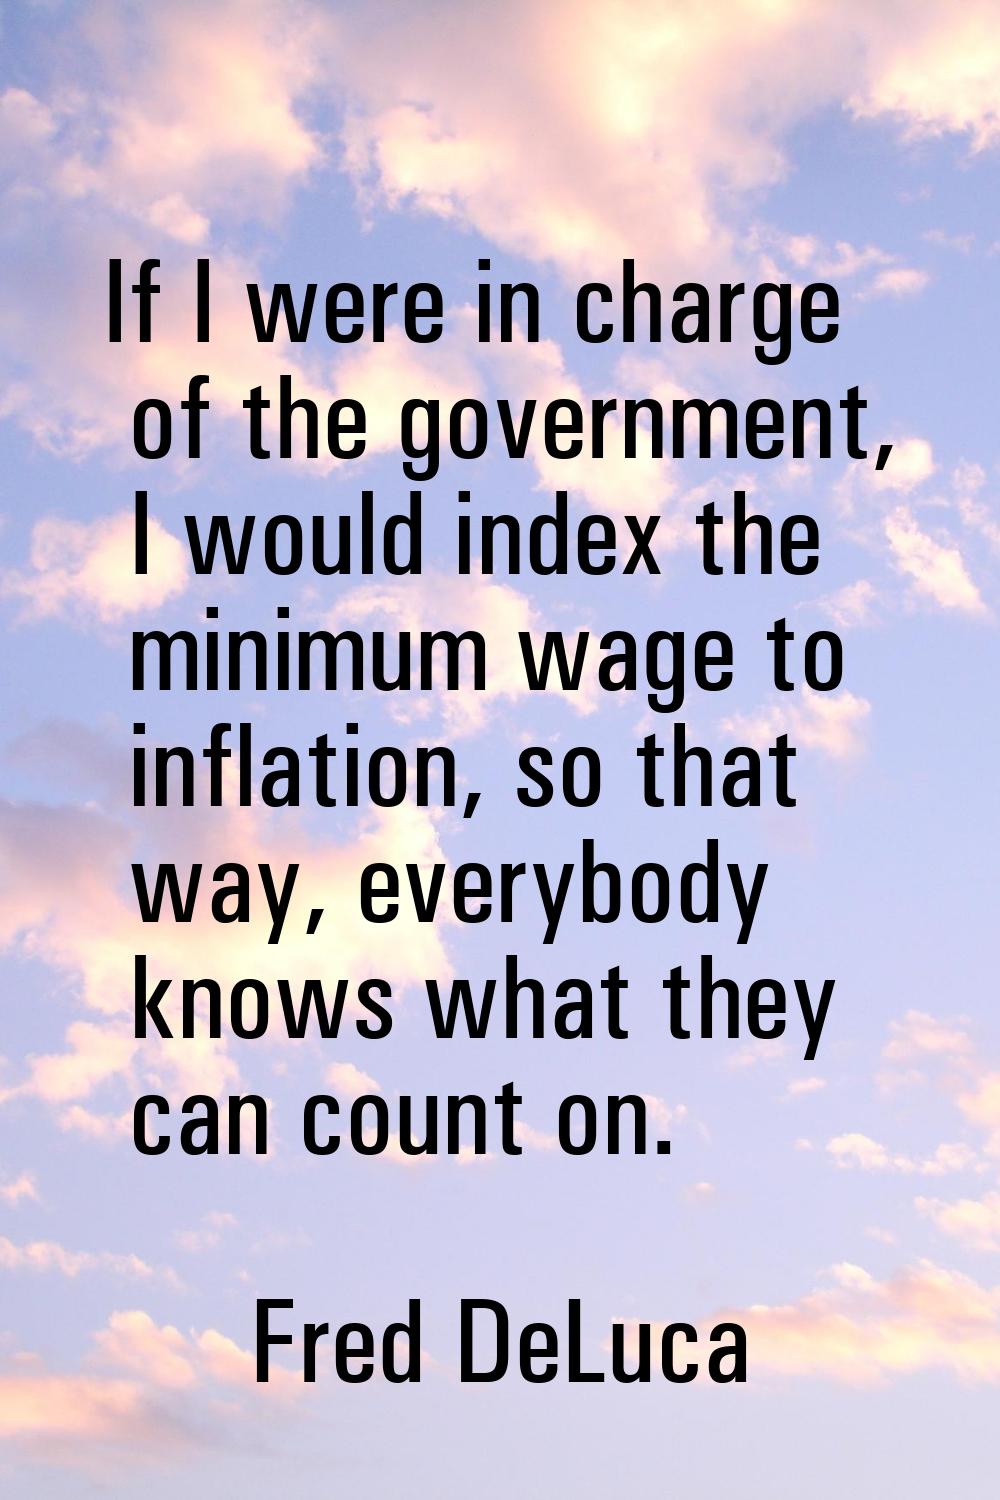 If I were in charge of the government, I would index the minimum wage to inflation, so that way, ev